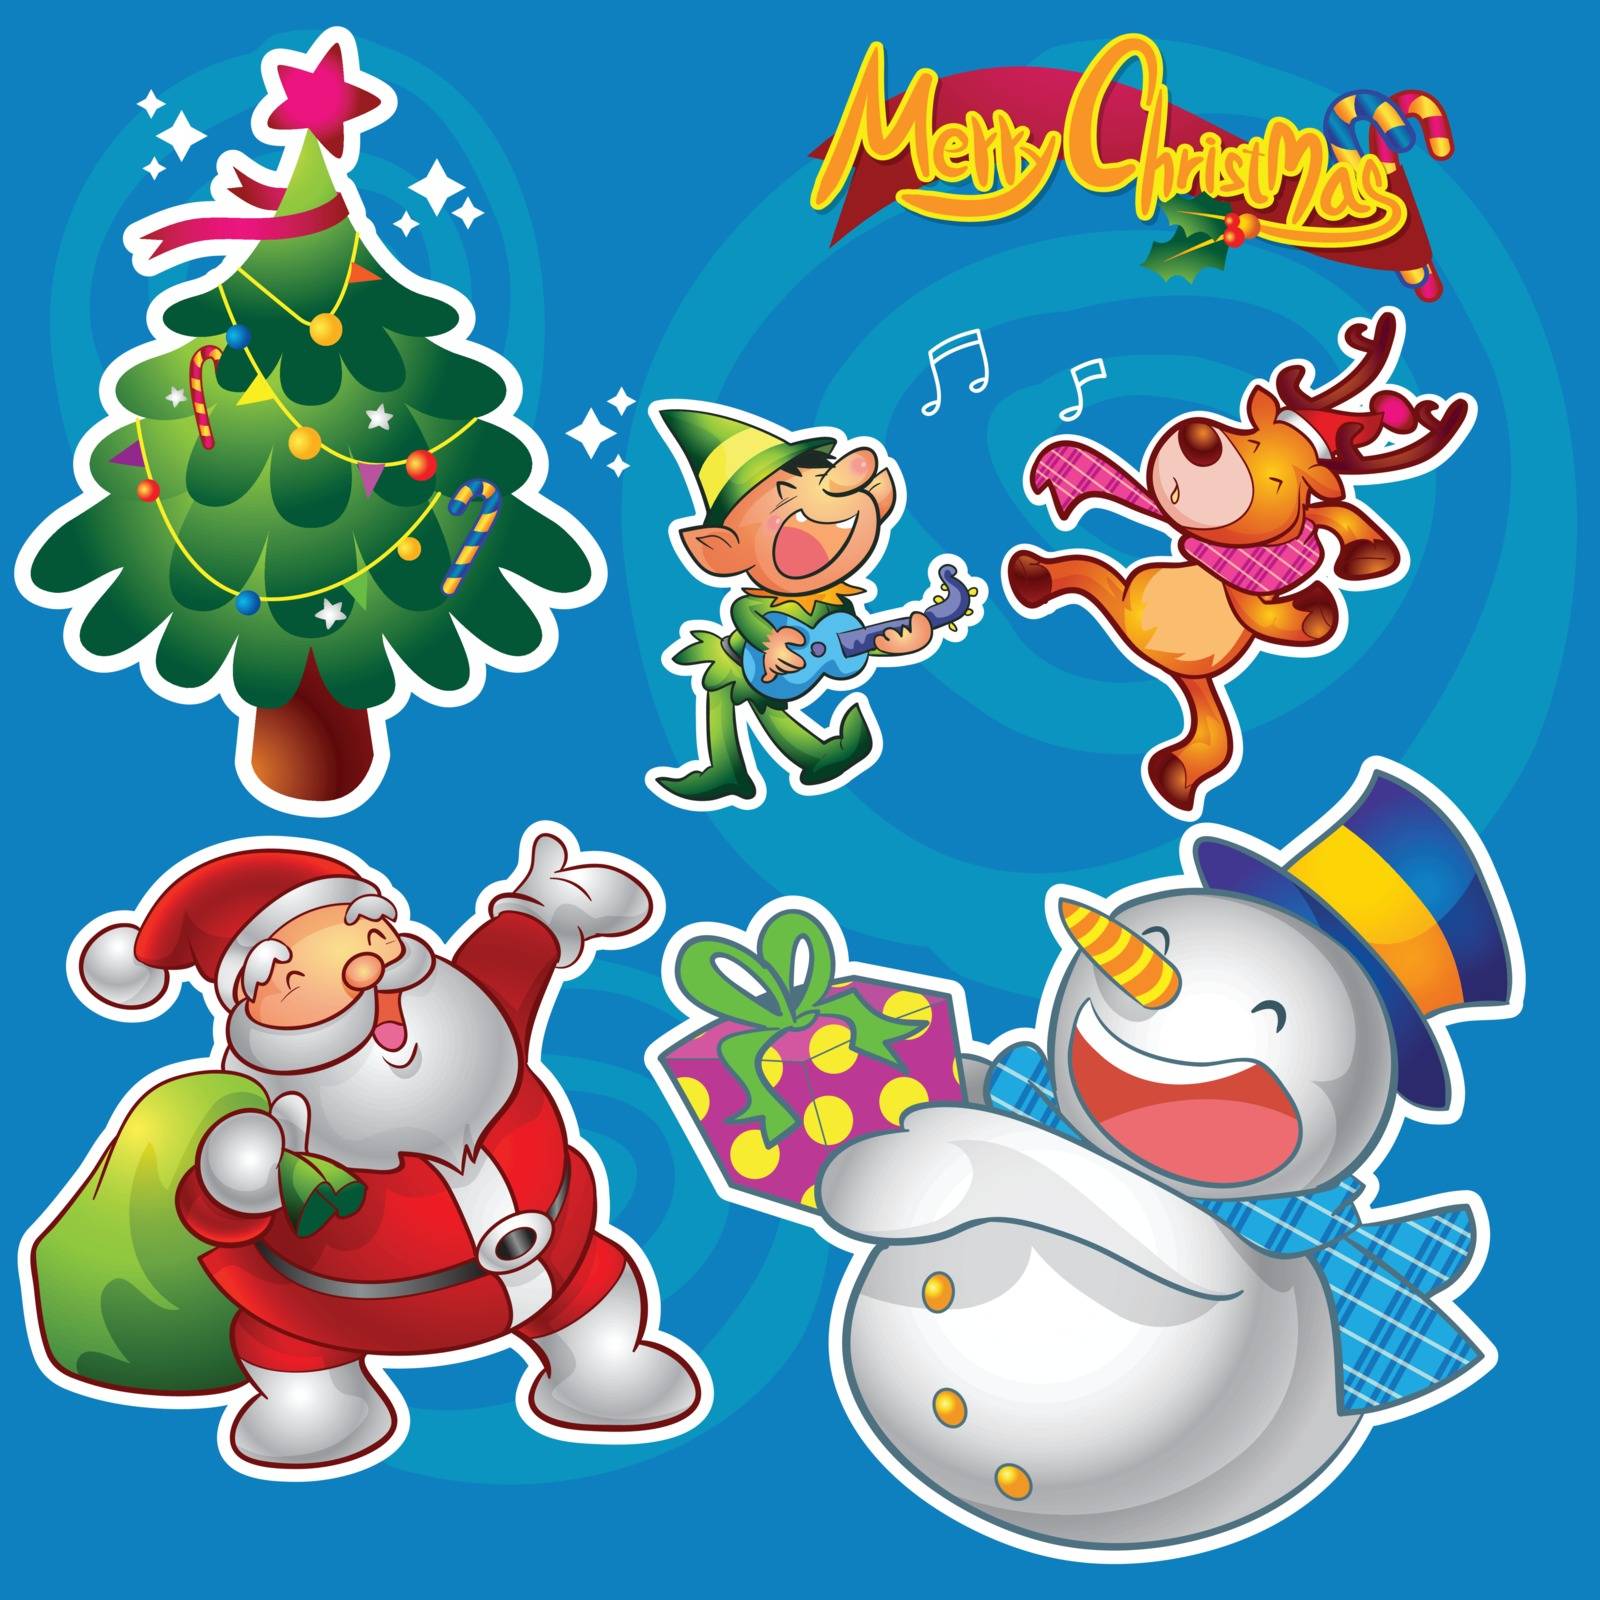 Vector set of colorful cute christmas characters and decorations